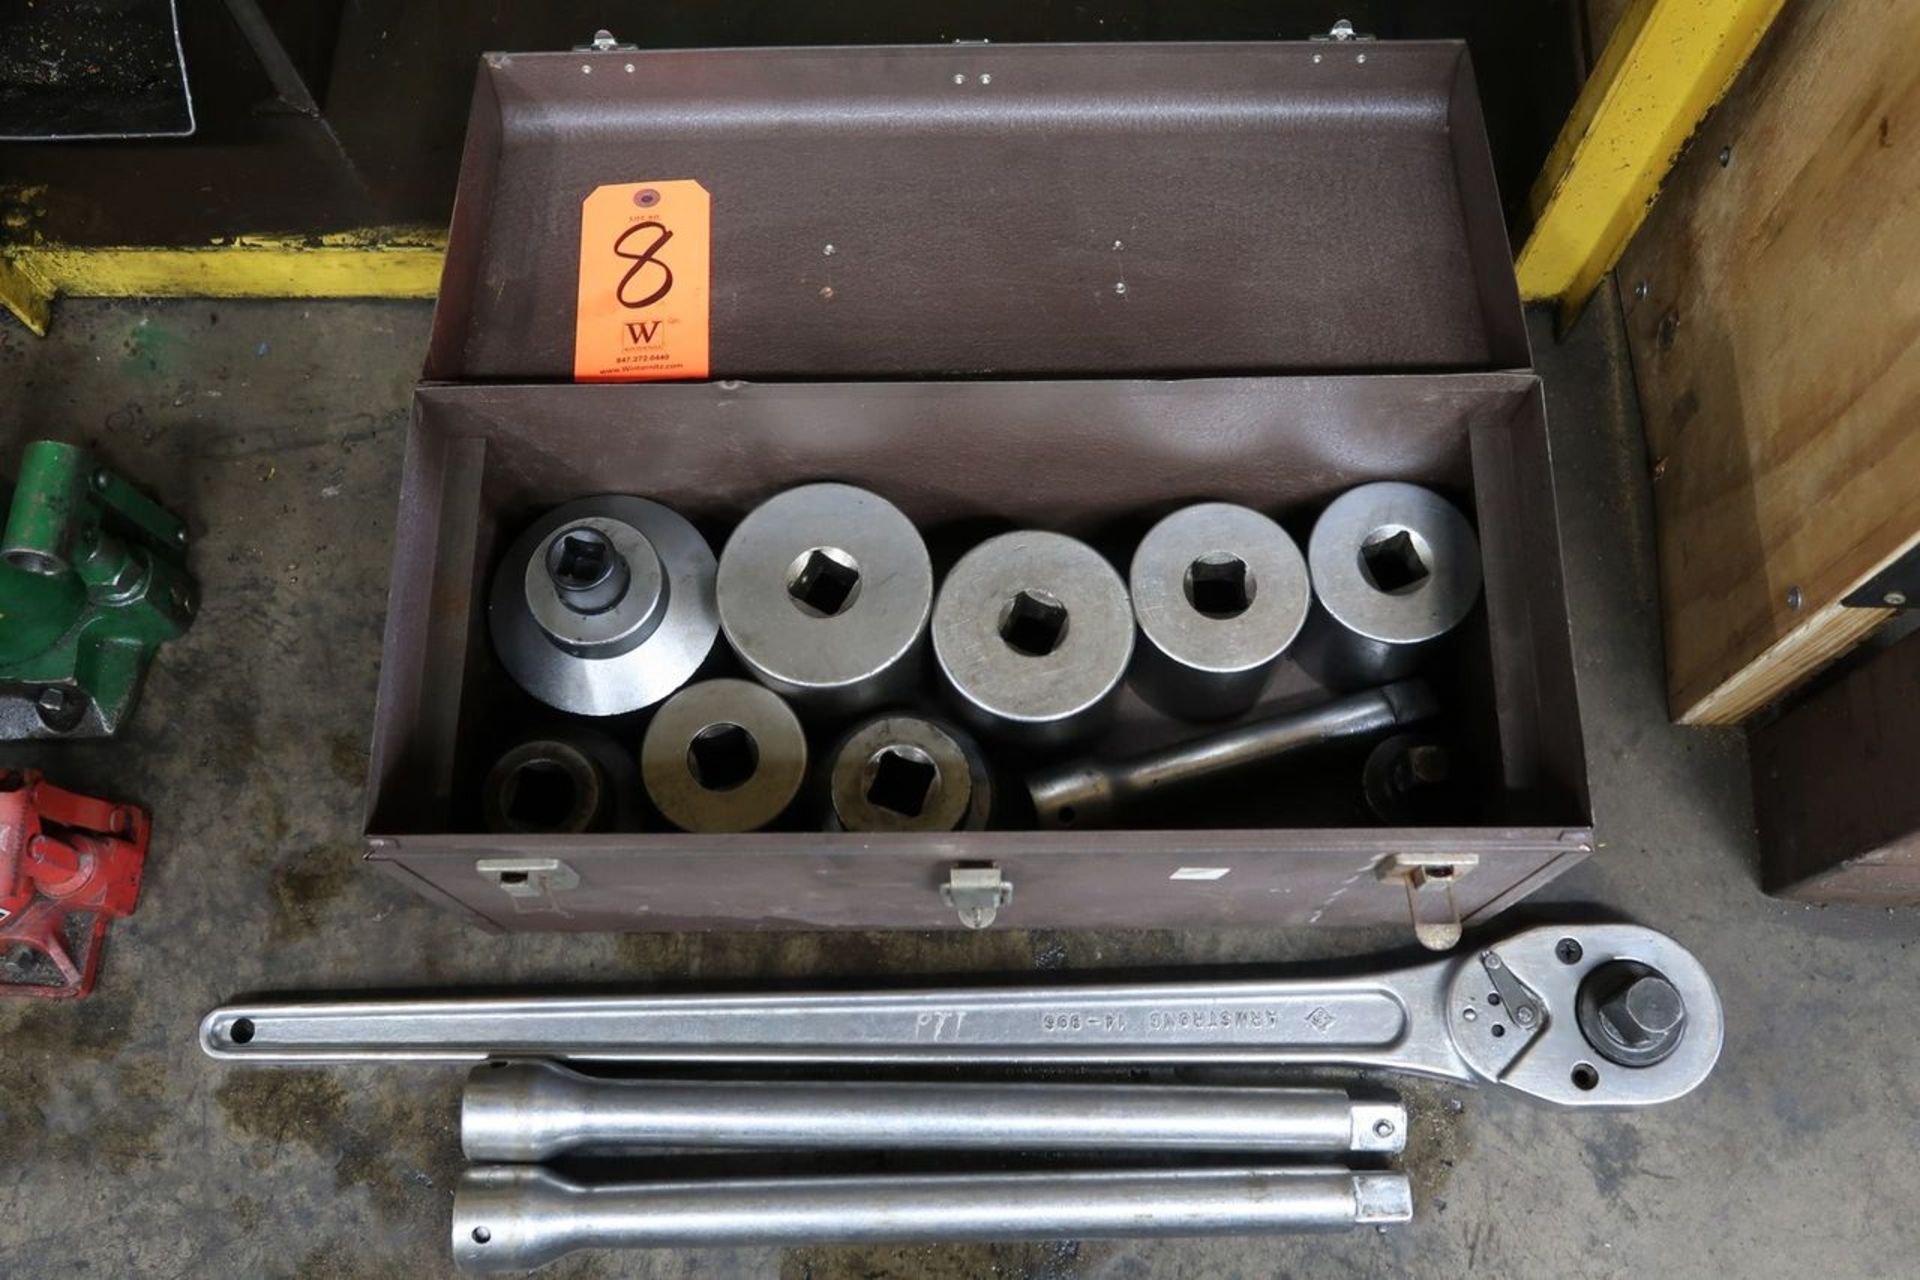 Kennedy Tool Box; with Contents of Assorted 1 in. Drive Sockets, Socket Extensions, & Socket Wrench - Image 2 of 2